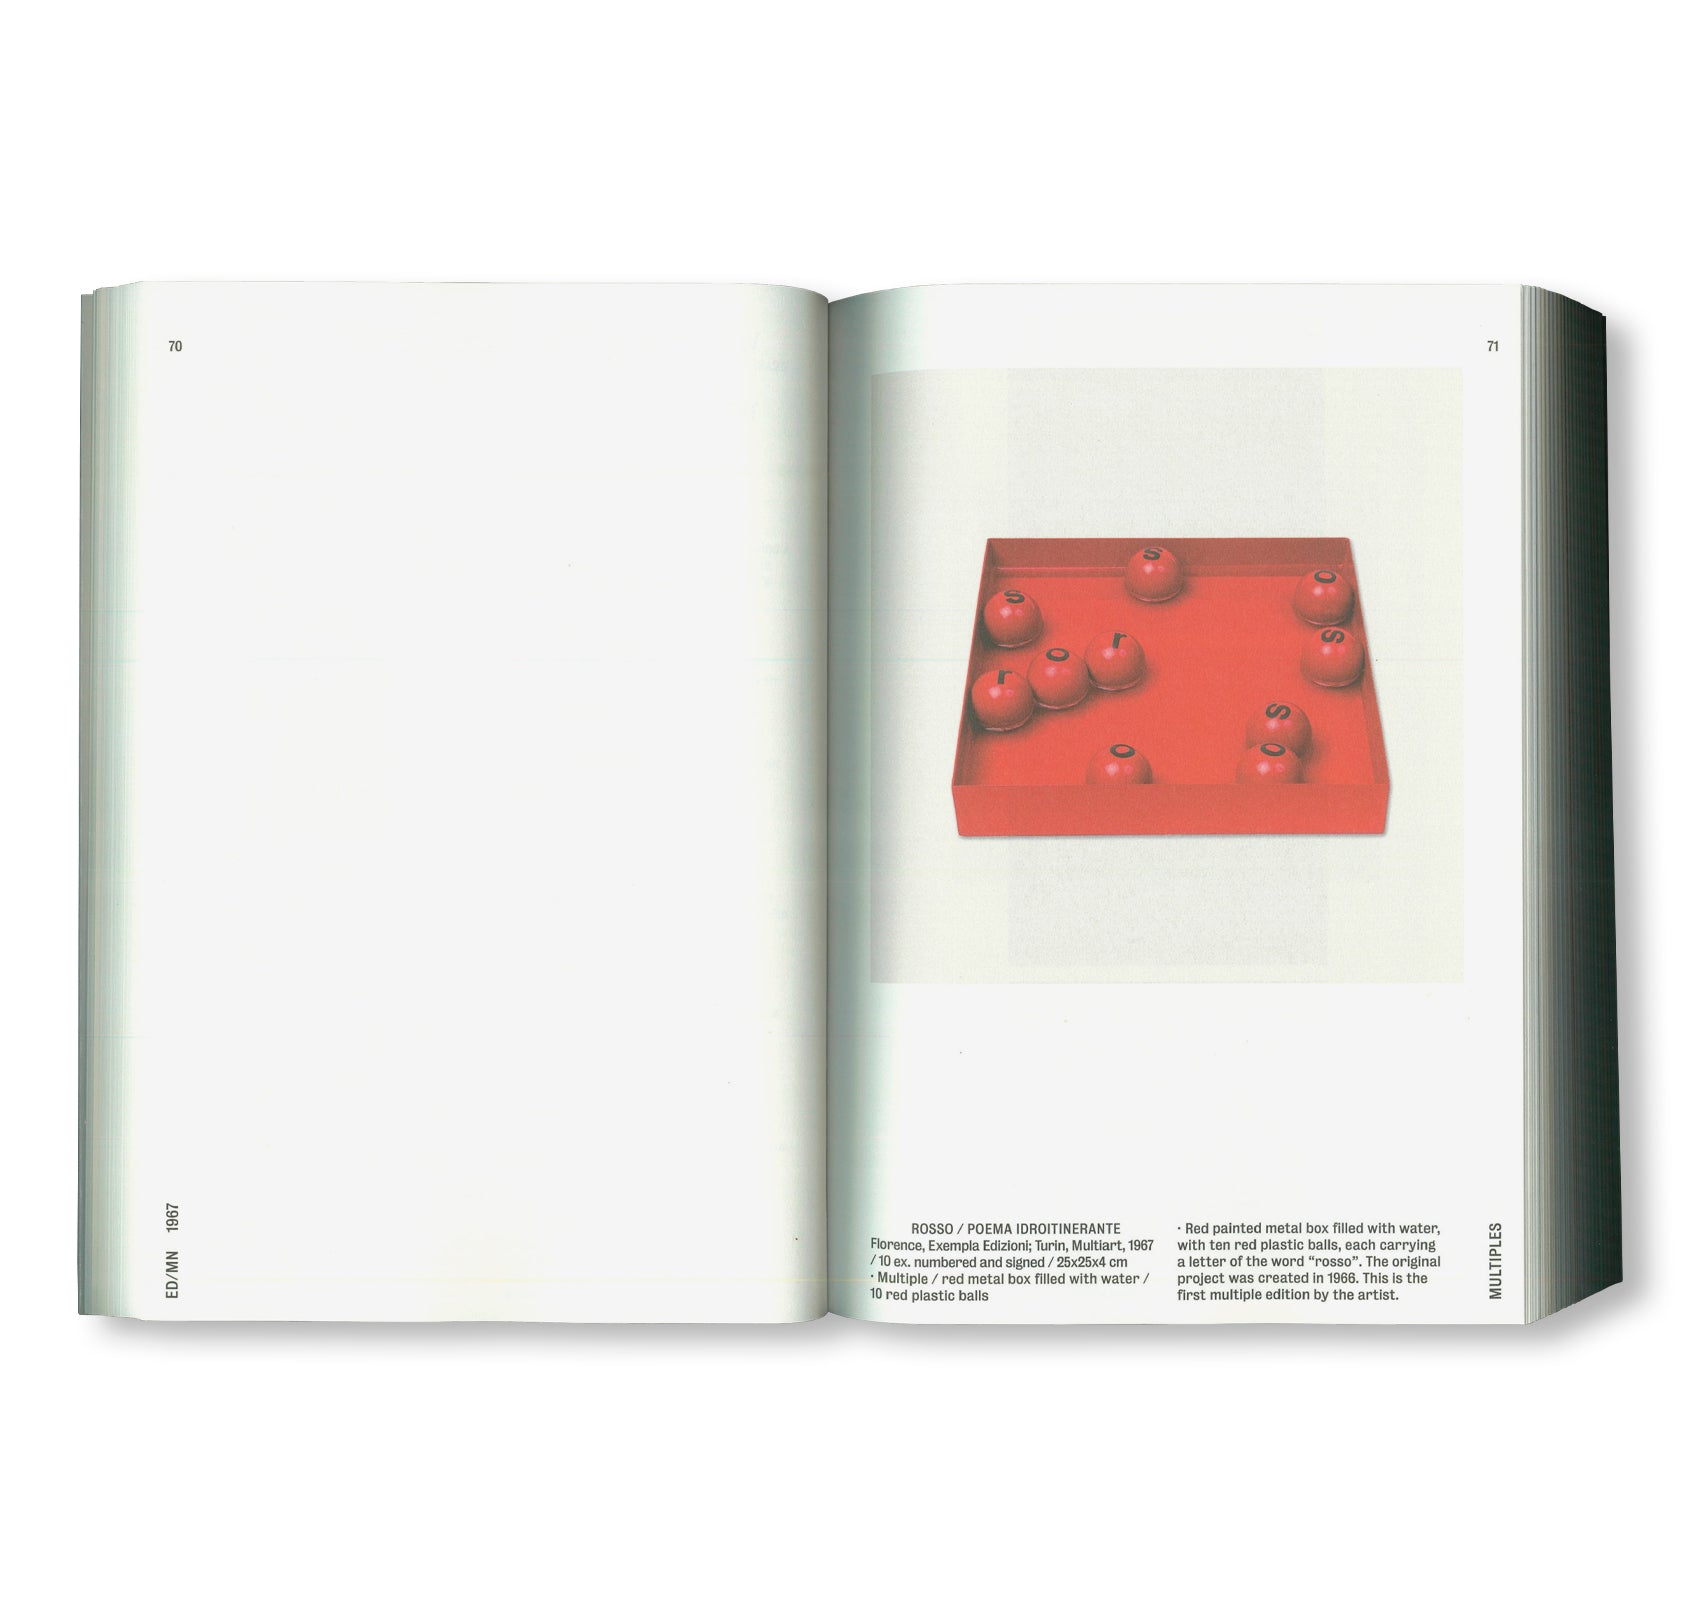 ED/MN – EDITIONS AND MULTIPLES 1967/2016 by Maurizio Nannucci